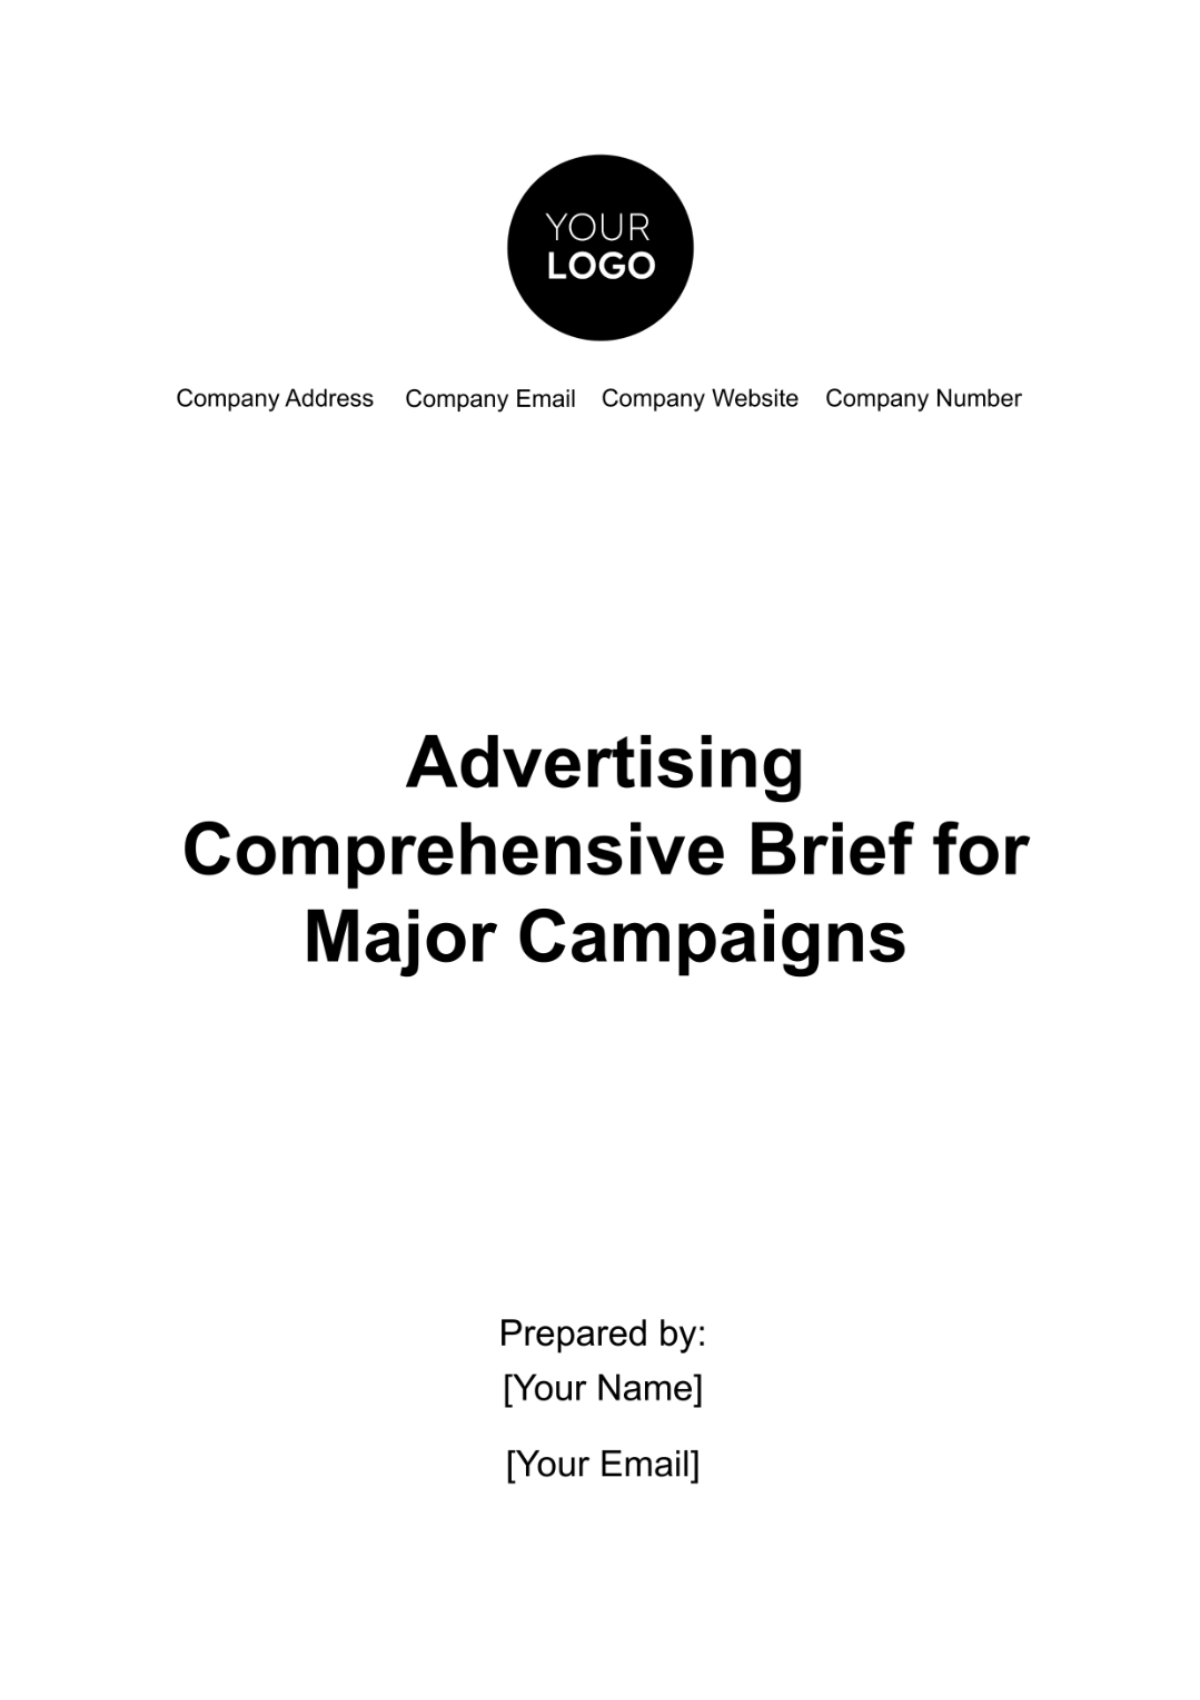 Free Advertising Comprehensive Brief for Major Campaigns Template